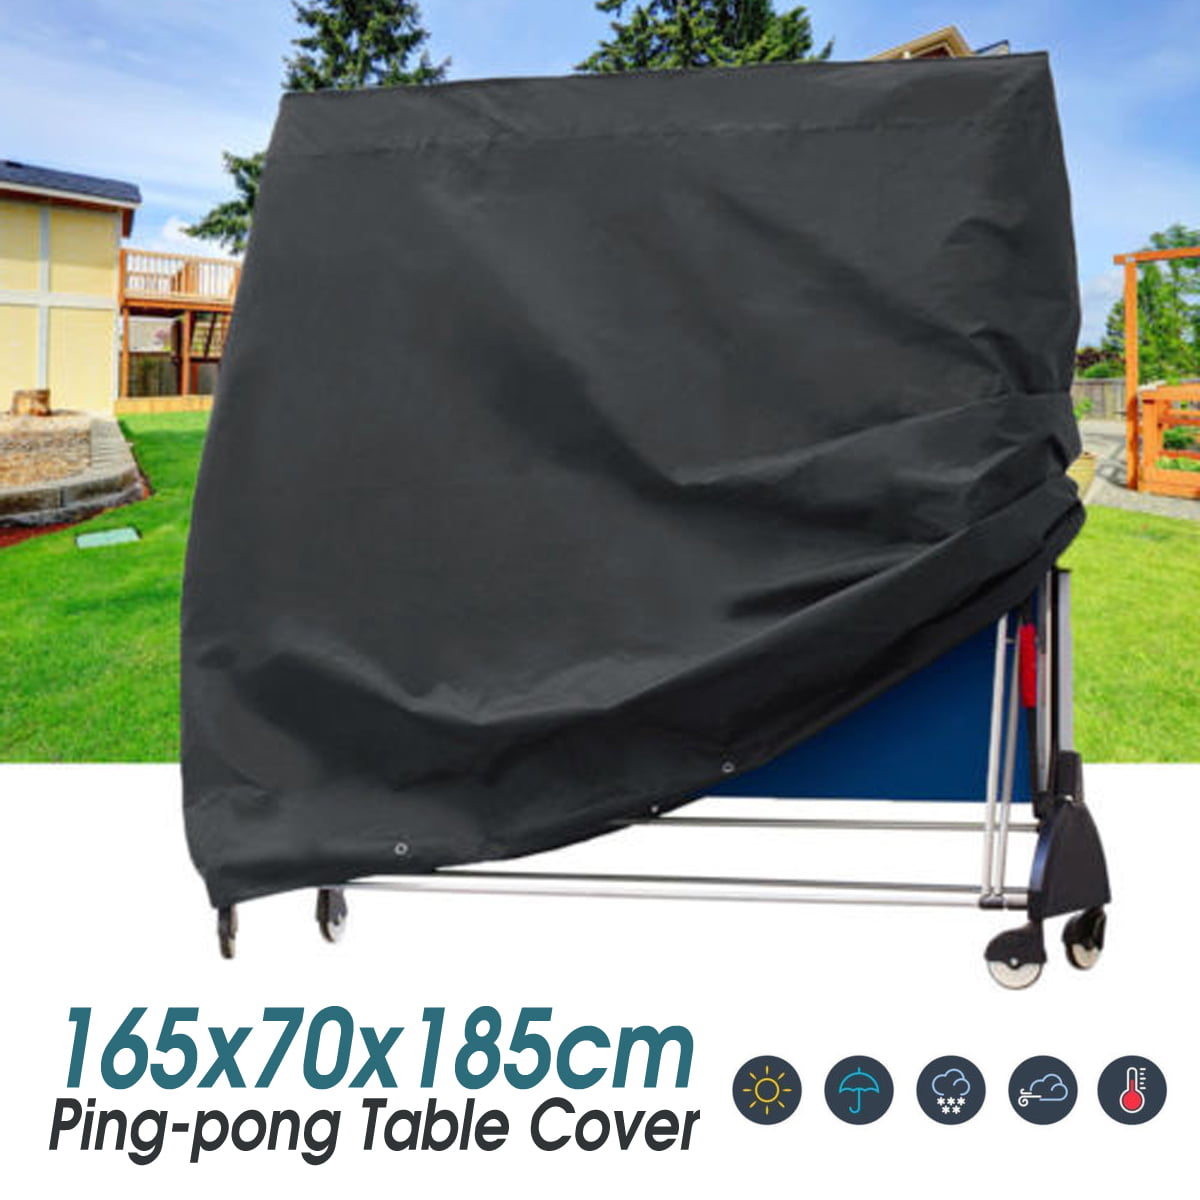 Large Duty Table Tennis Ping Pong In/Outdoor Table Cover Waterproof 165x70x185cm 